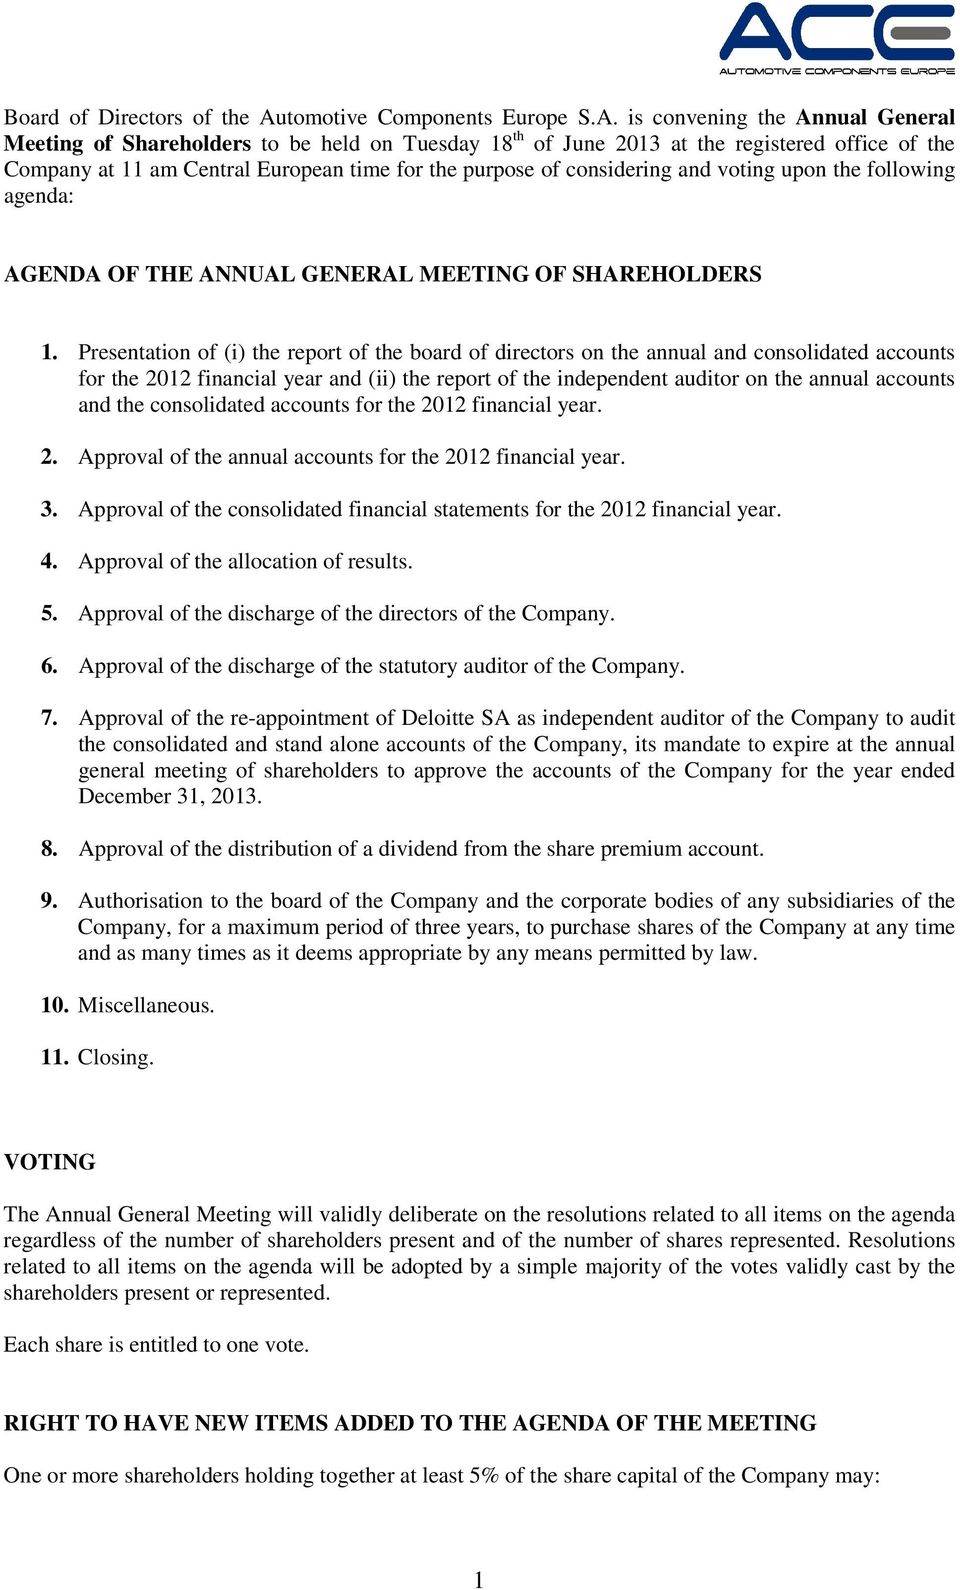 is convening the Annual General Meeting of Shareholders to be held on Tuesday 18 th of June 2013 at the registered office of the Company at 11 am Central European time for the purpose of considering